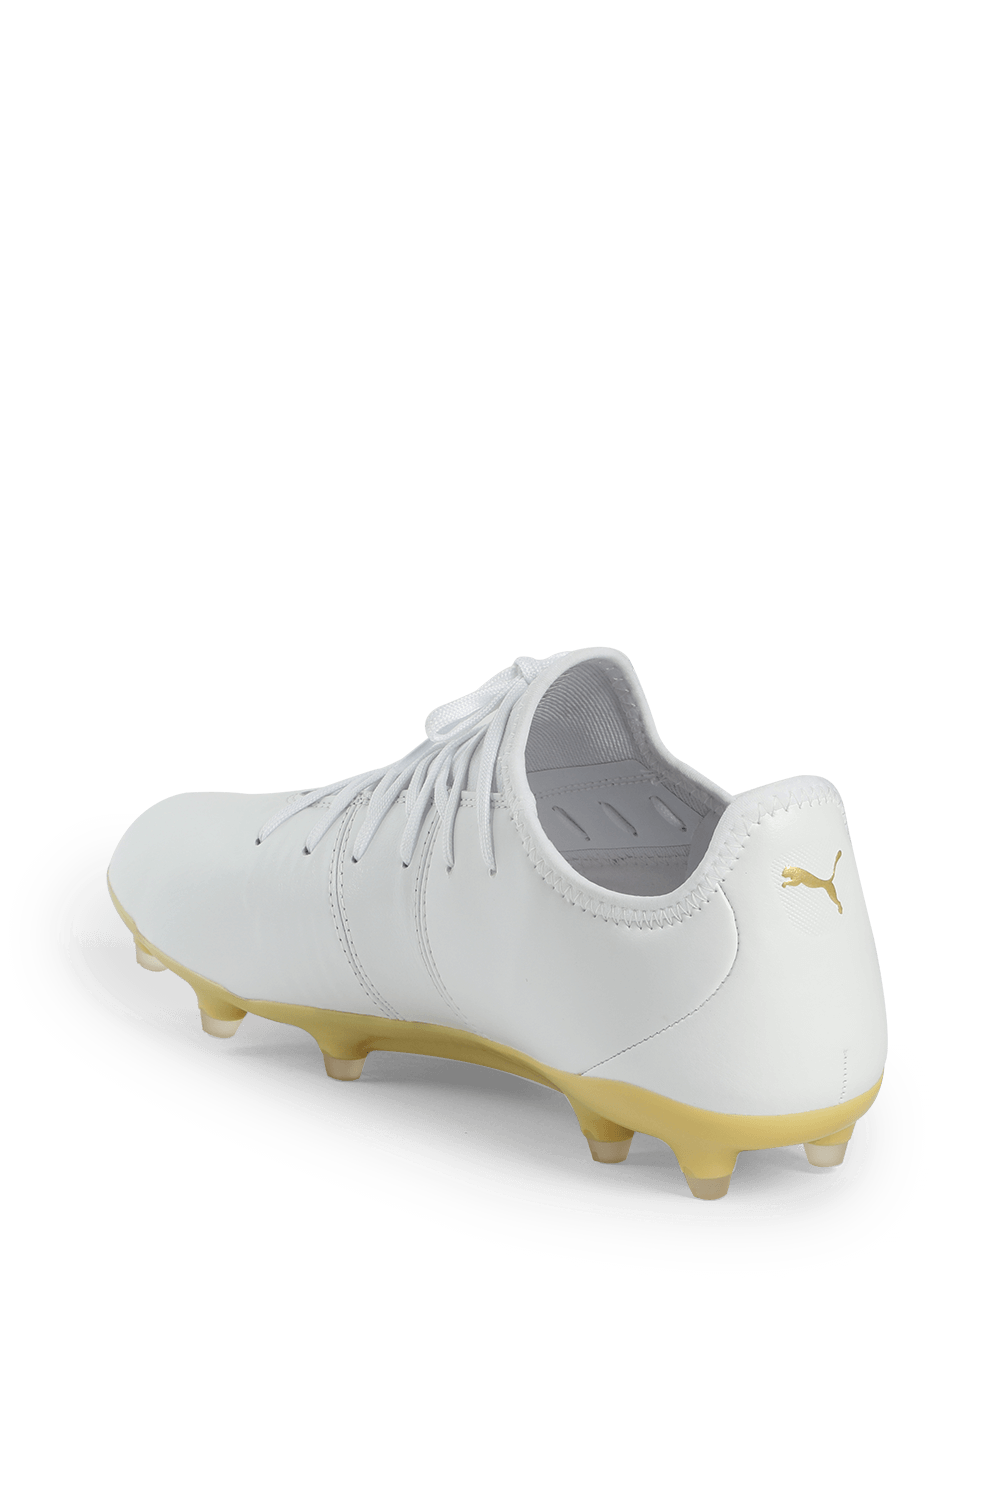 King Pro FG Football Shoes in White PUMA